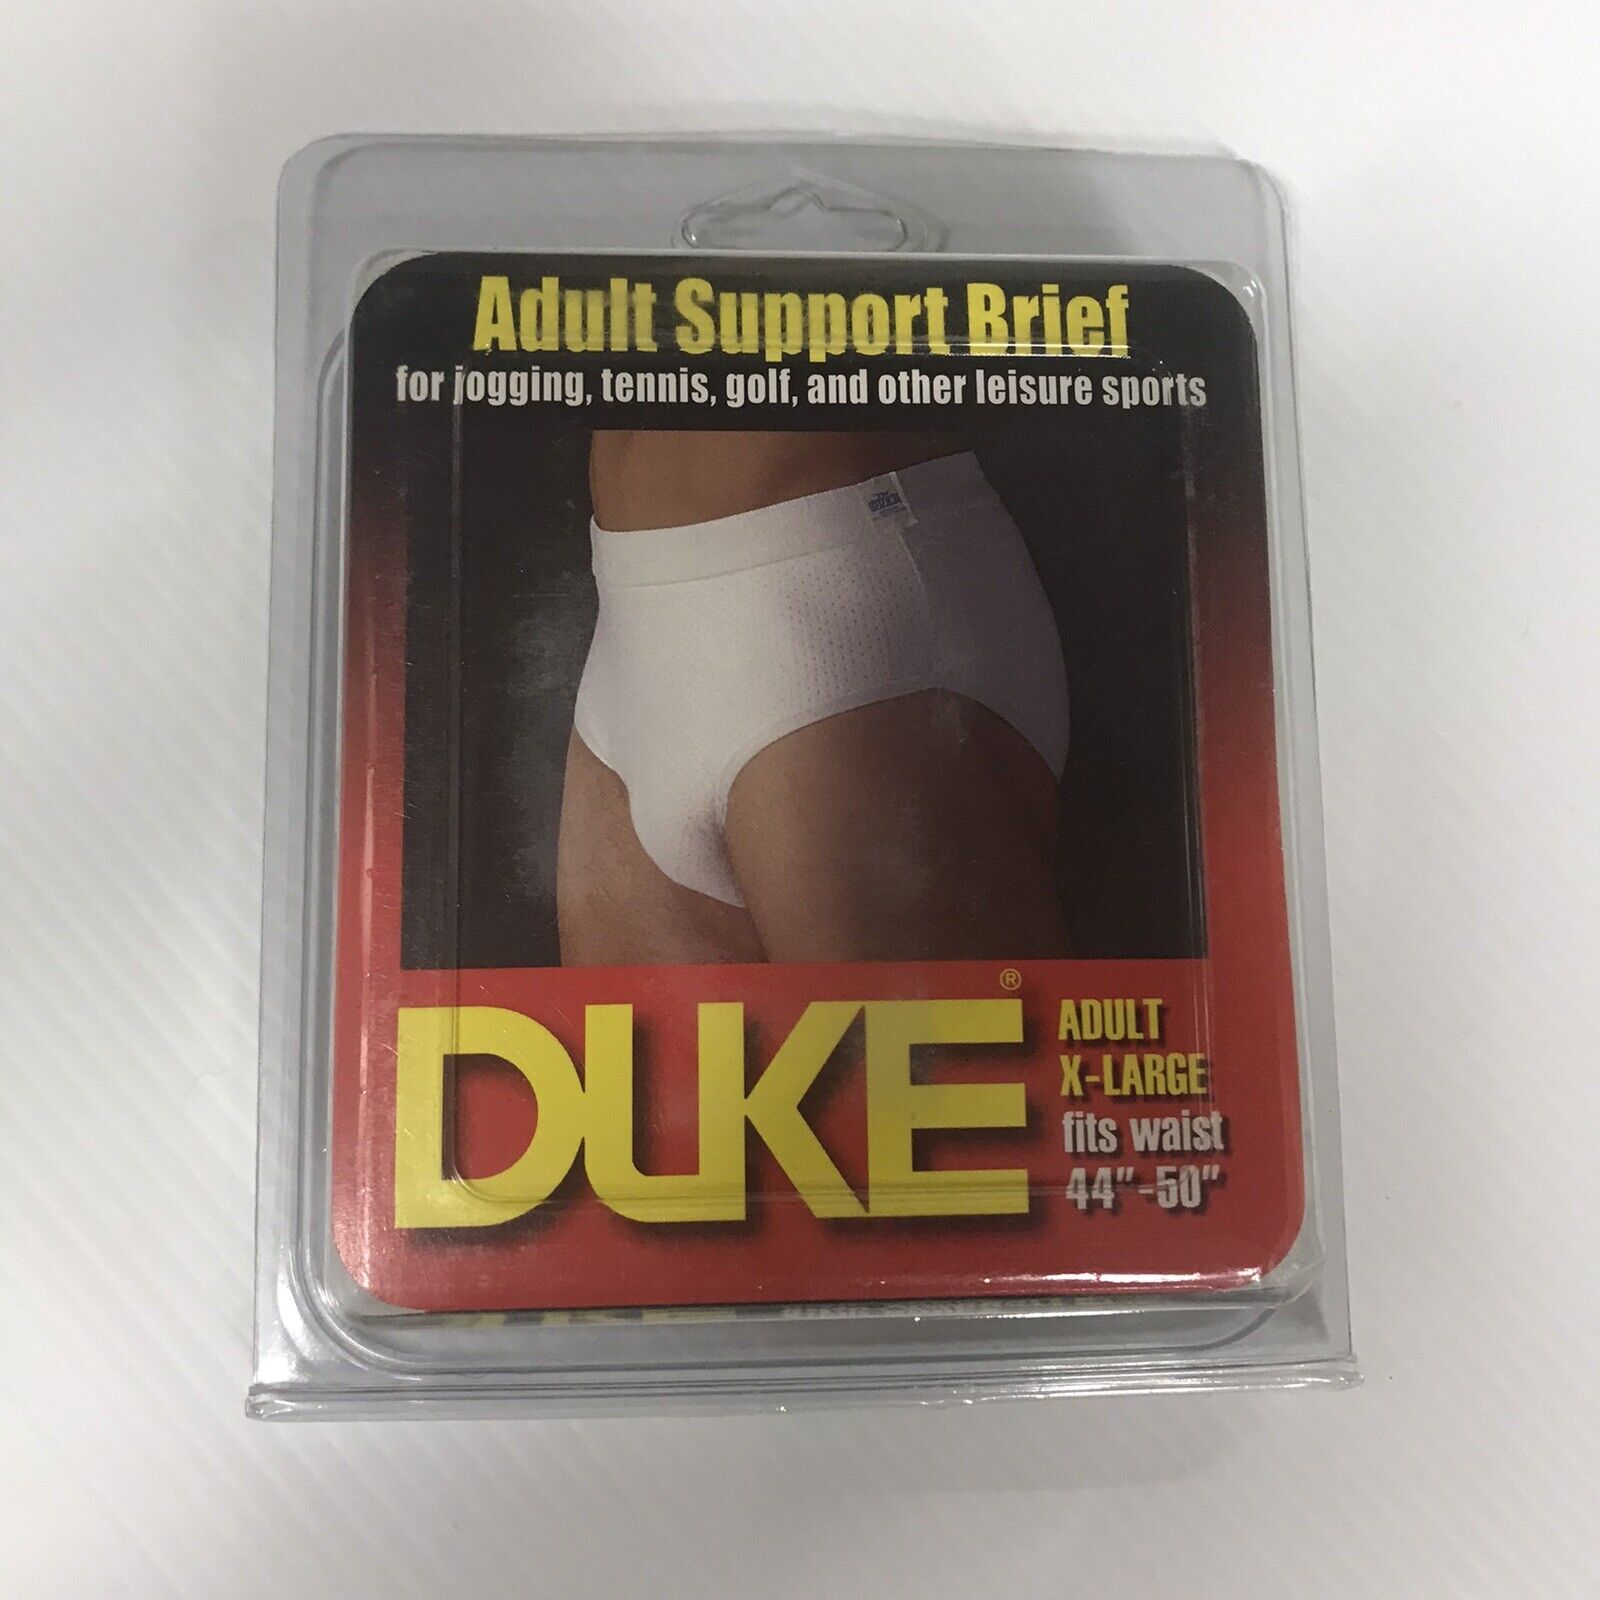 Duke Be super welcome Athletic Adult Reservation Supporter Brief